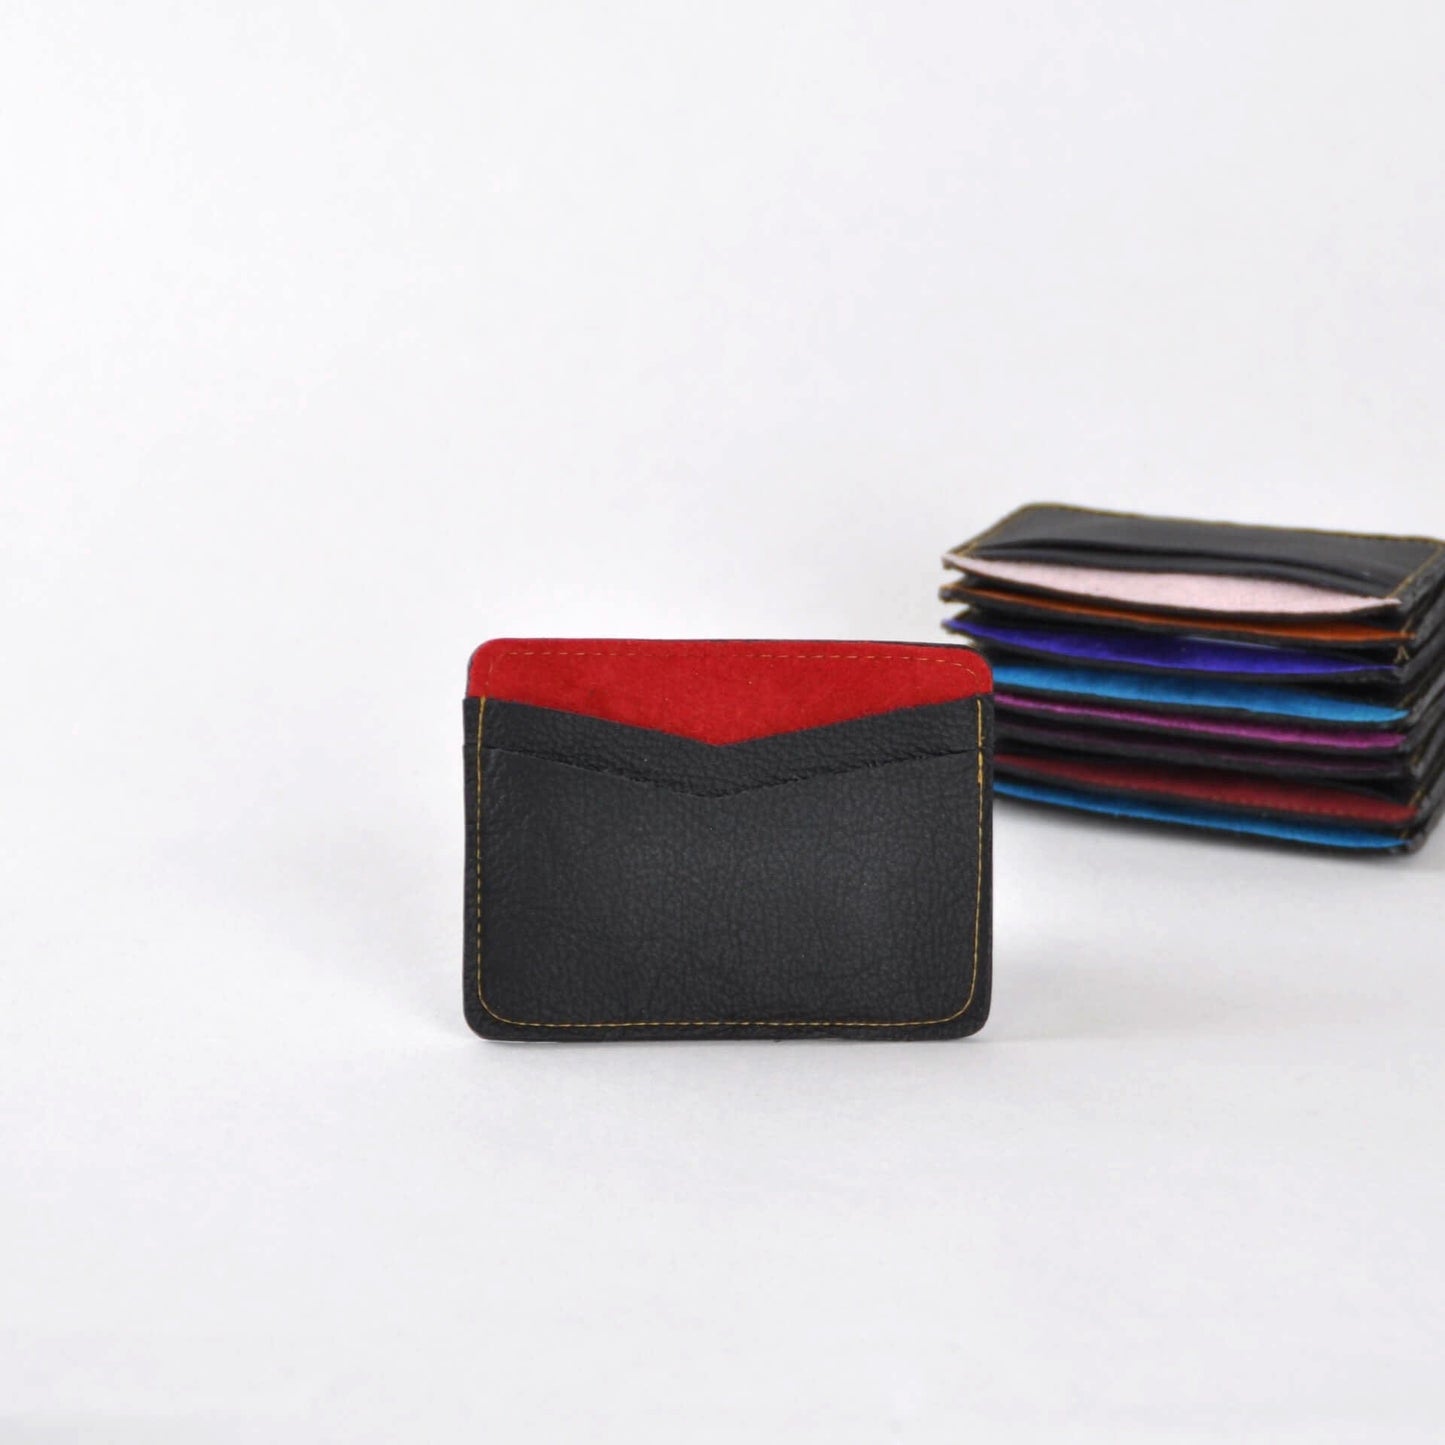 Zoe Dunn Designs Purse / Wallet Black / Red Card Holder - Recycled Leather